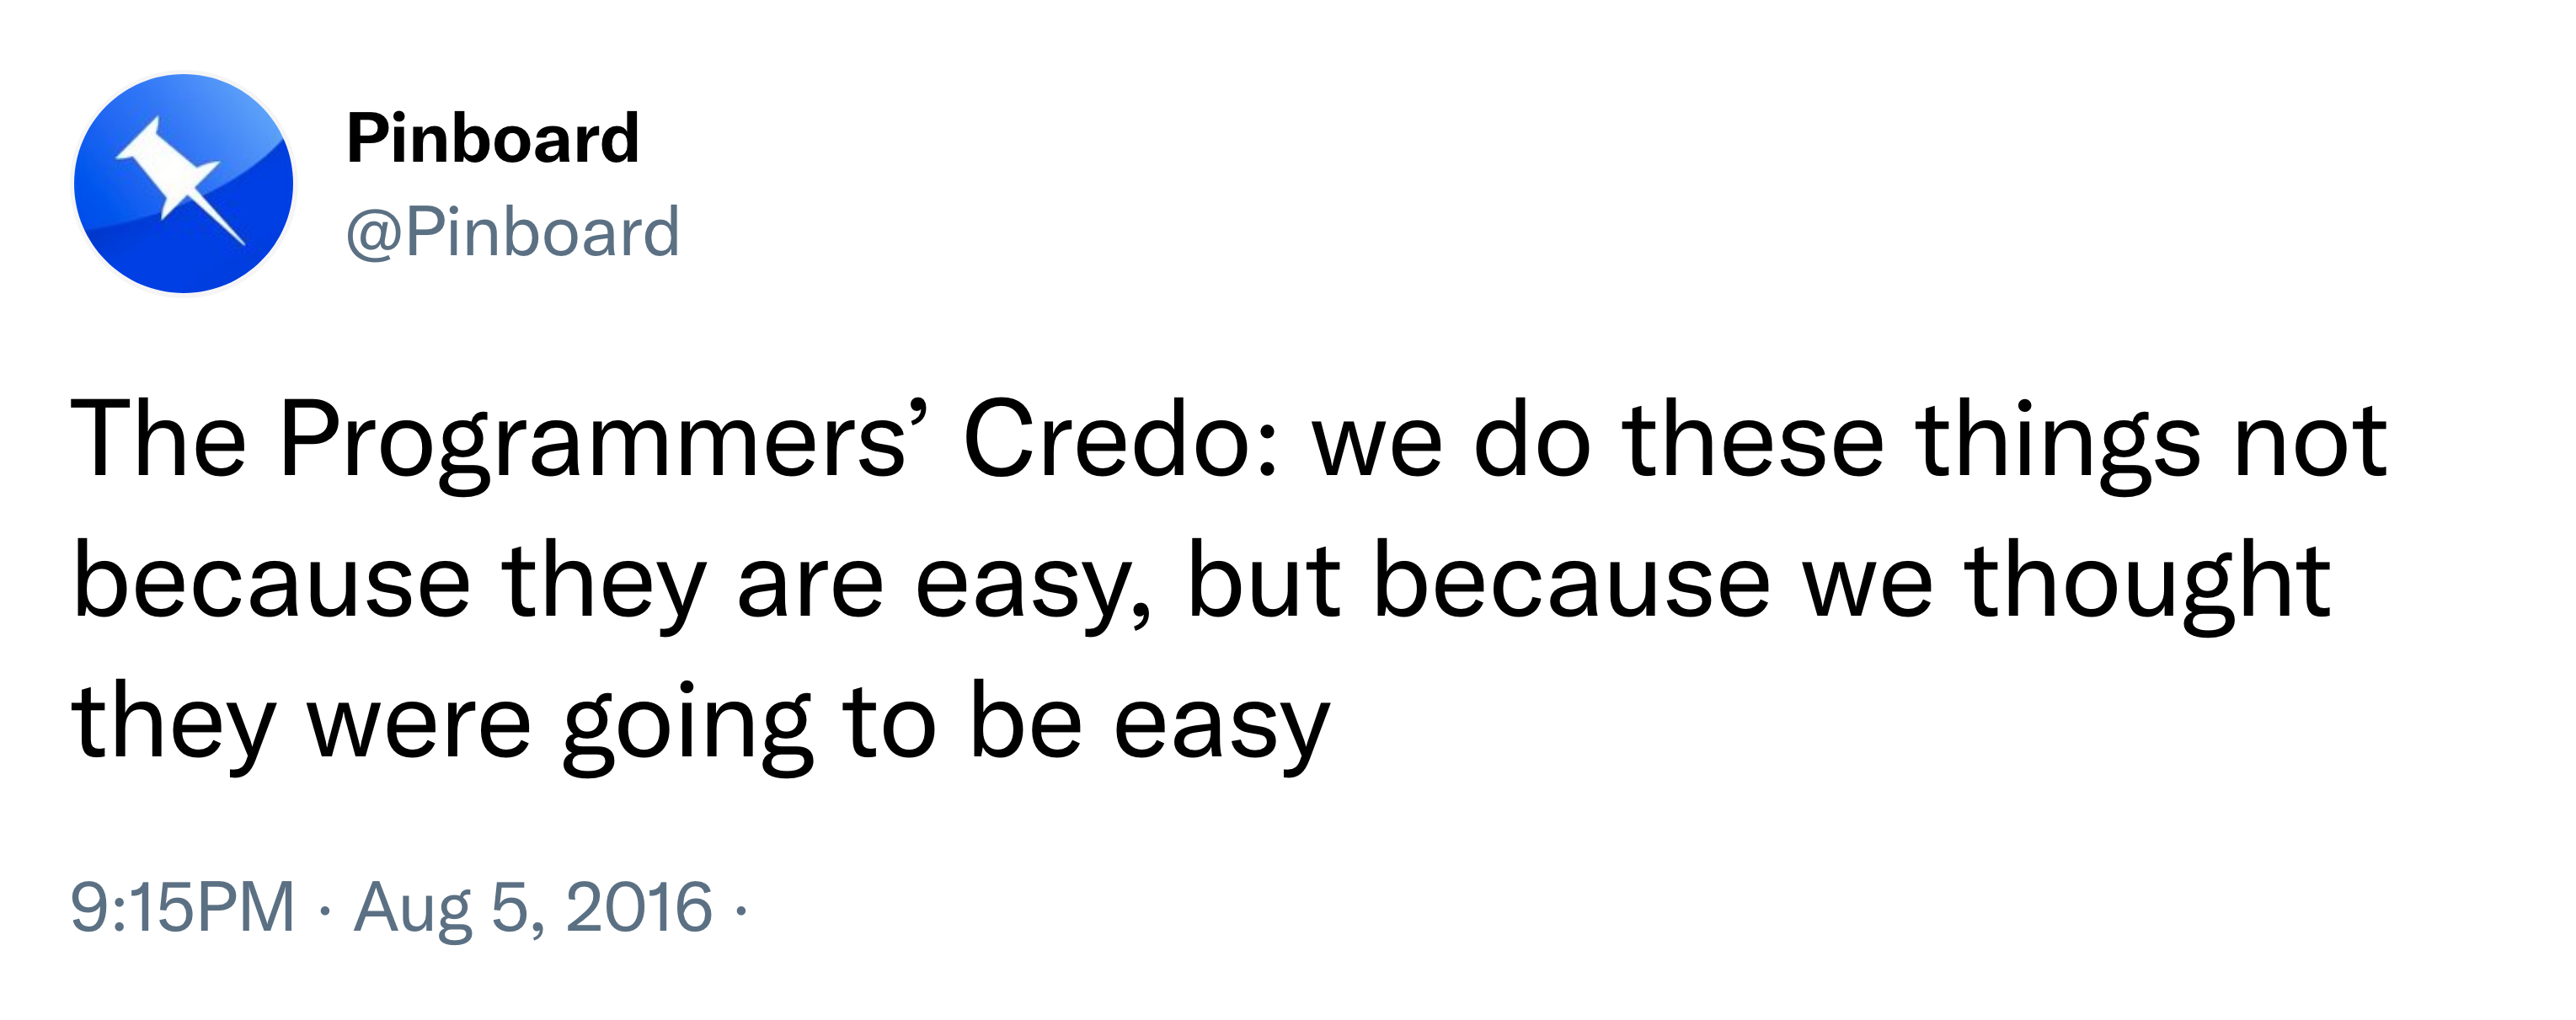 The Programmers’ Credo: we do these things not because they are easy, but because we thought they were going to be easy